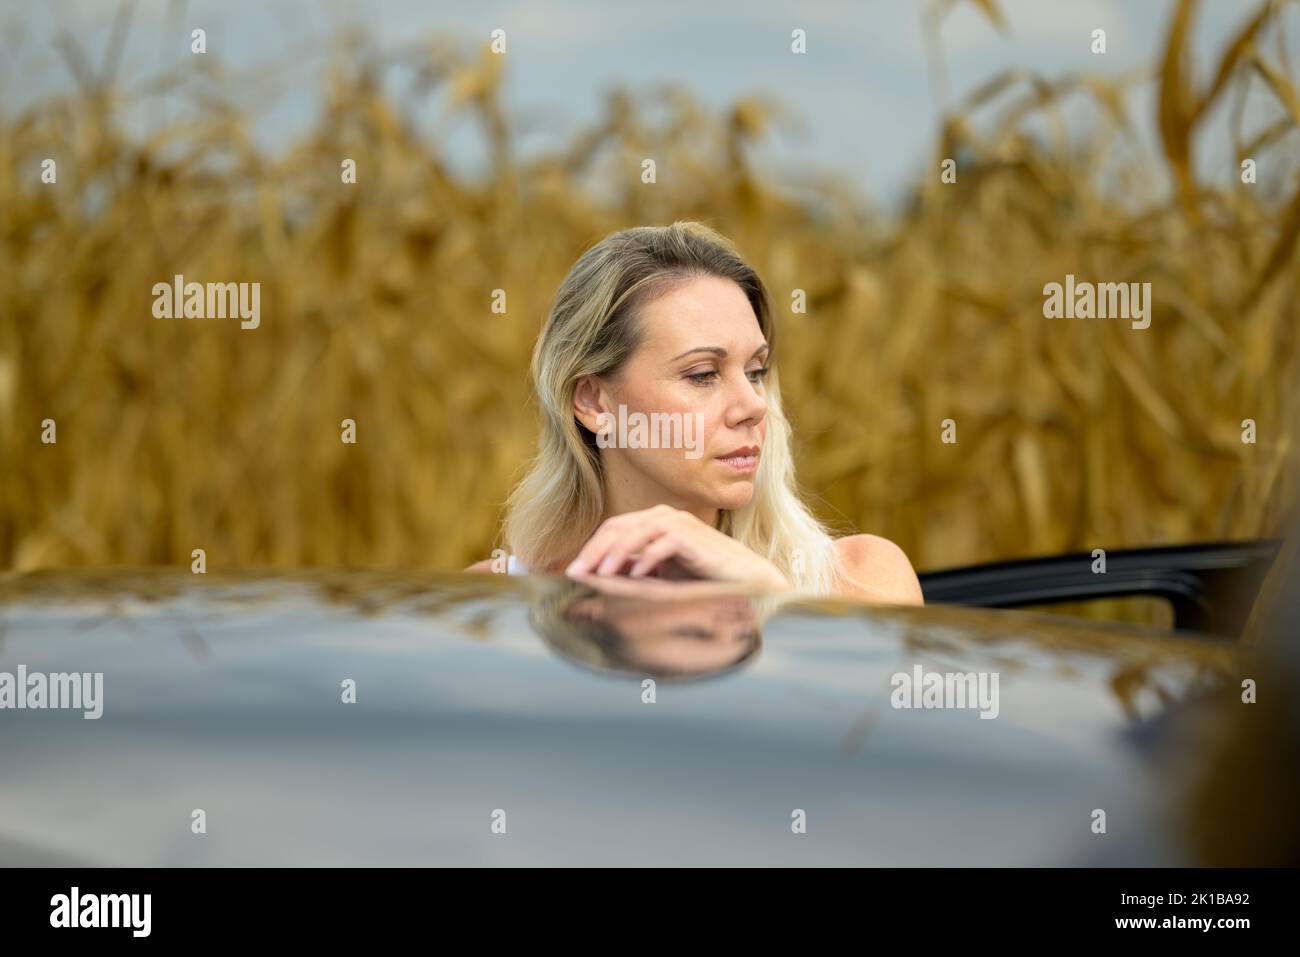 Woman standing by a car with a thoughtful looking aside in the background a cornfield Stock Photo